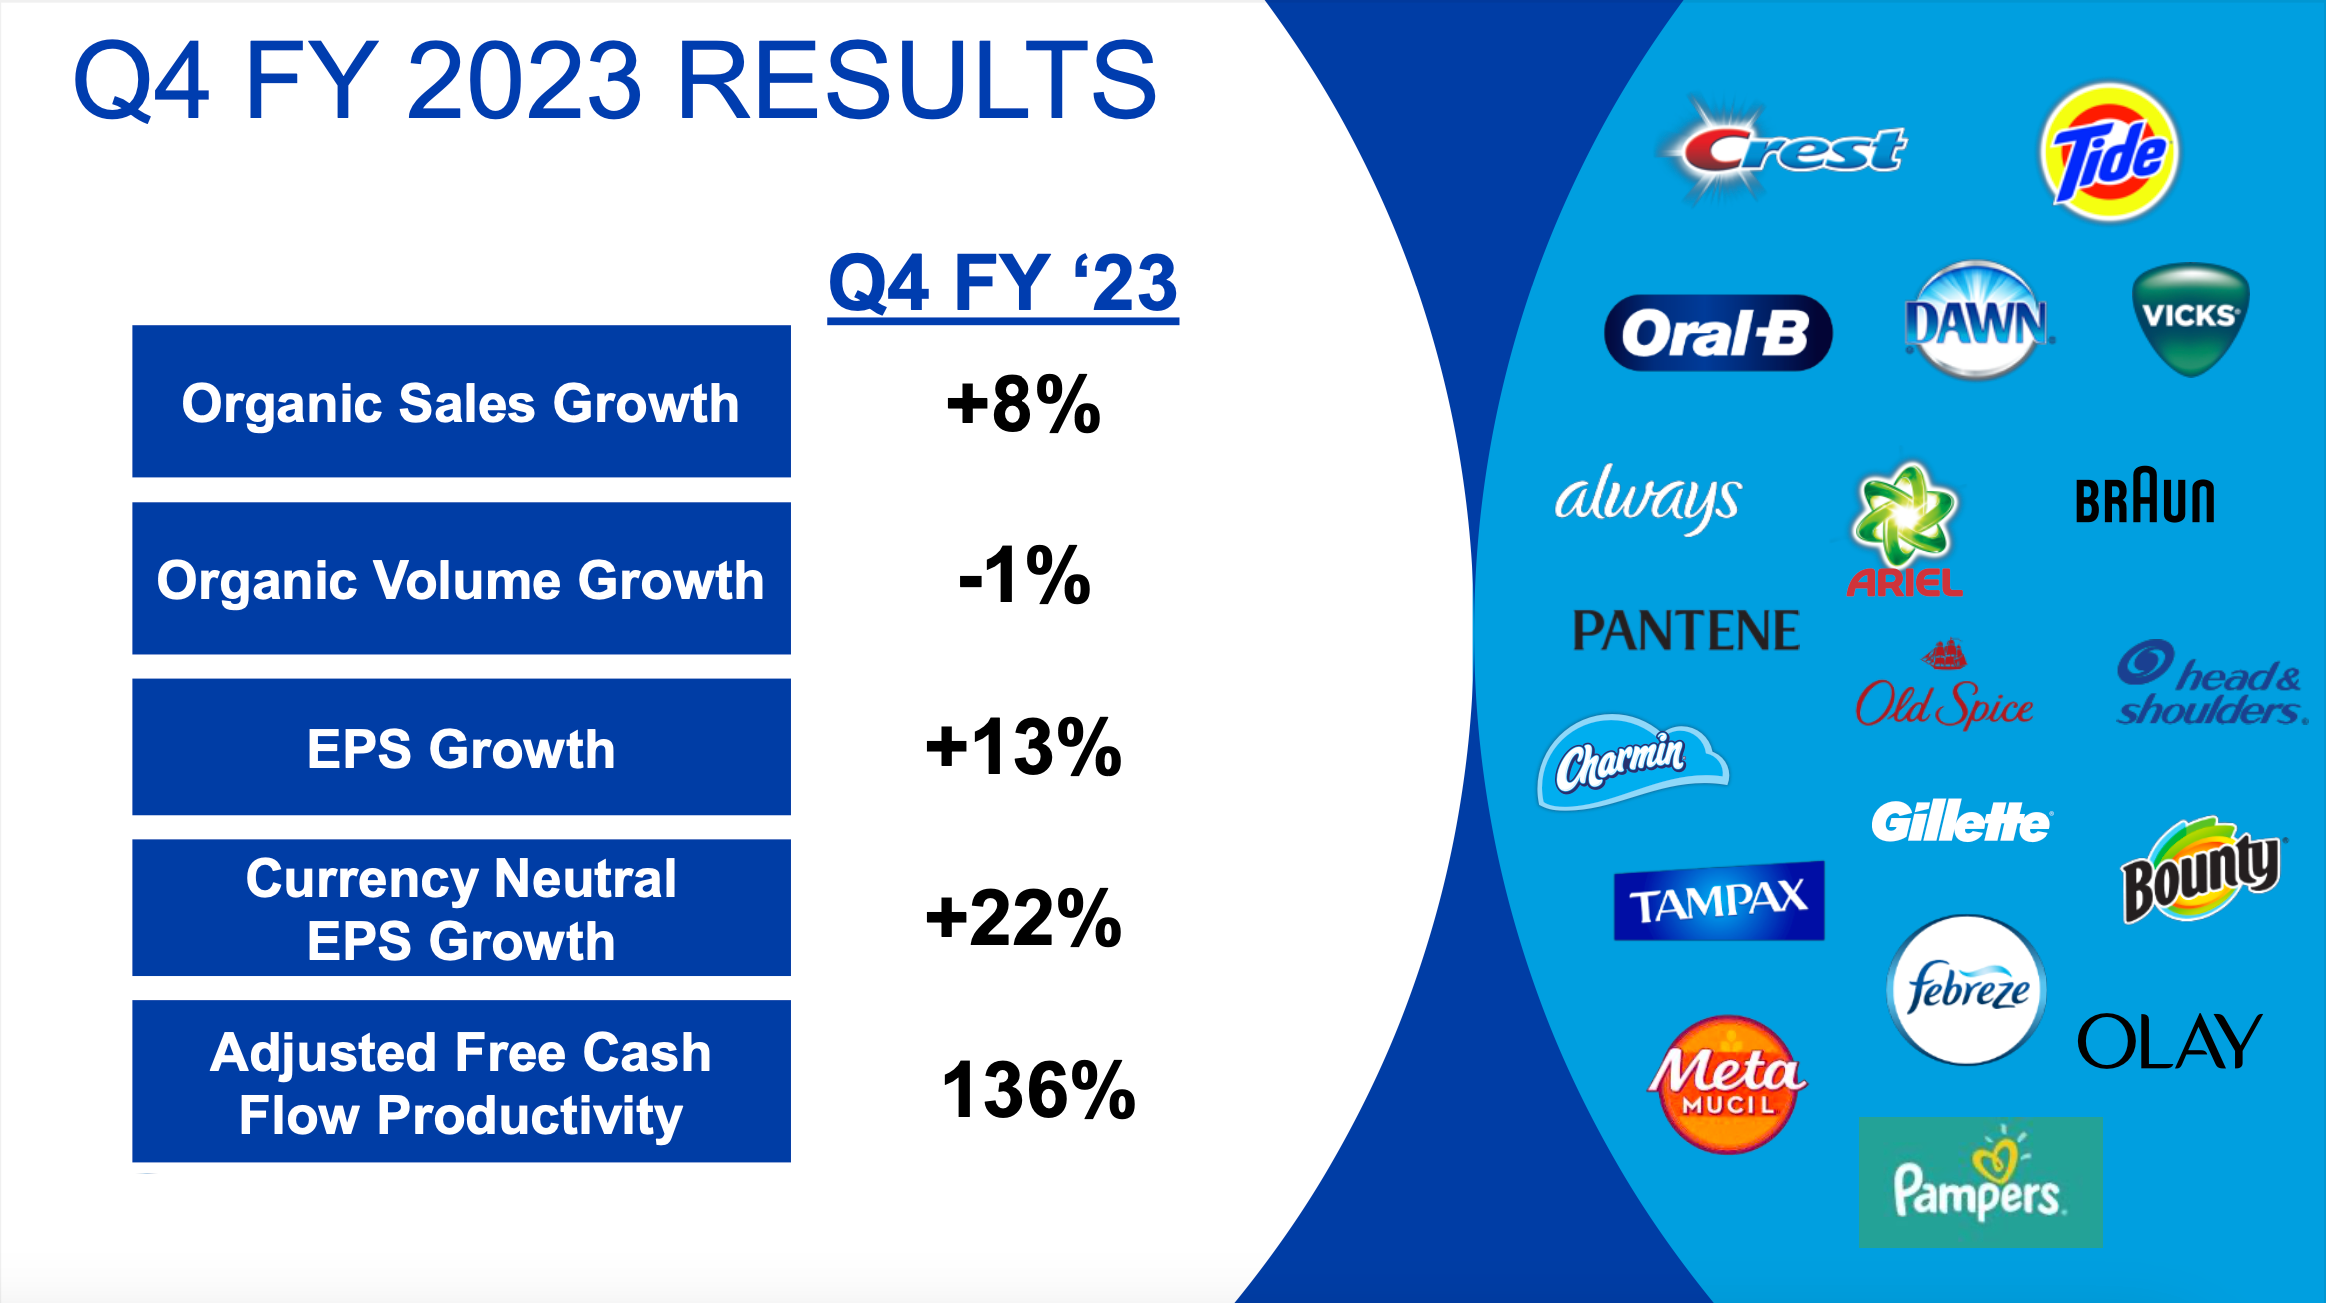 P&G's uneventful quarter, guidance overshadows compelling execution